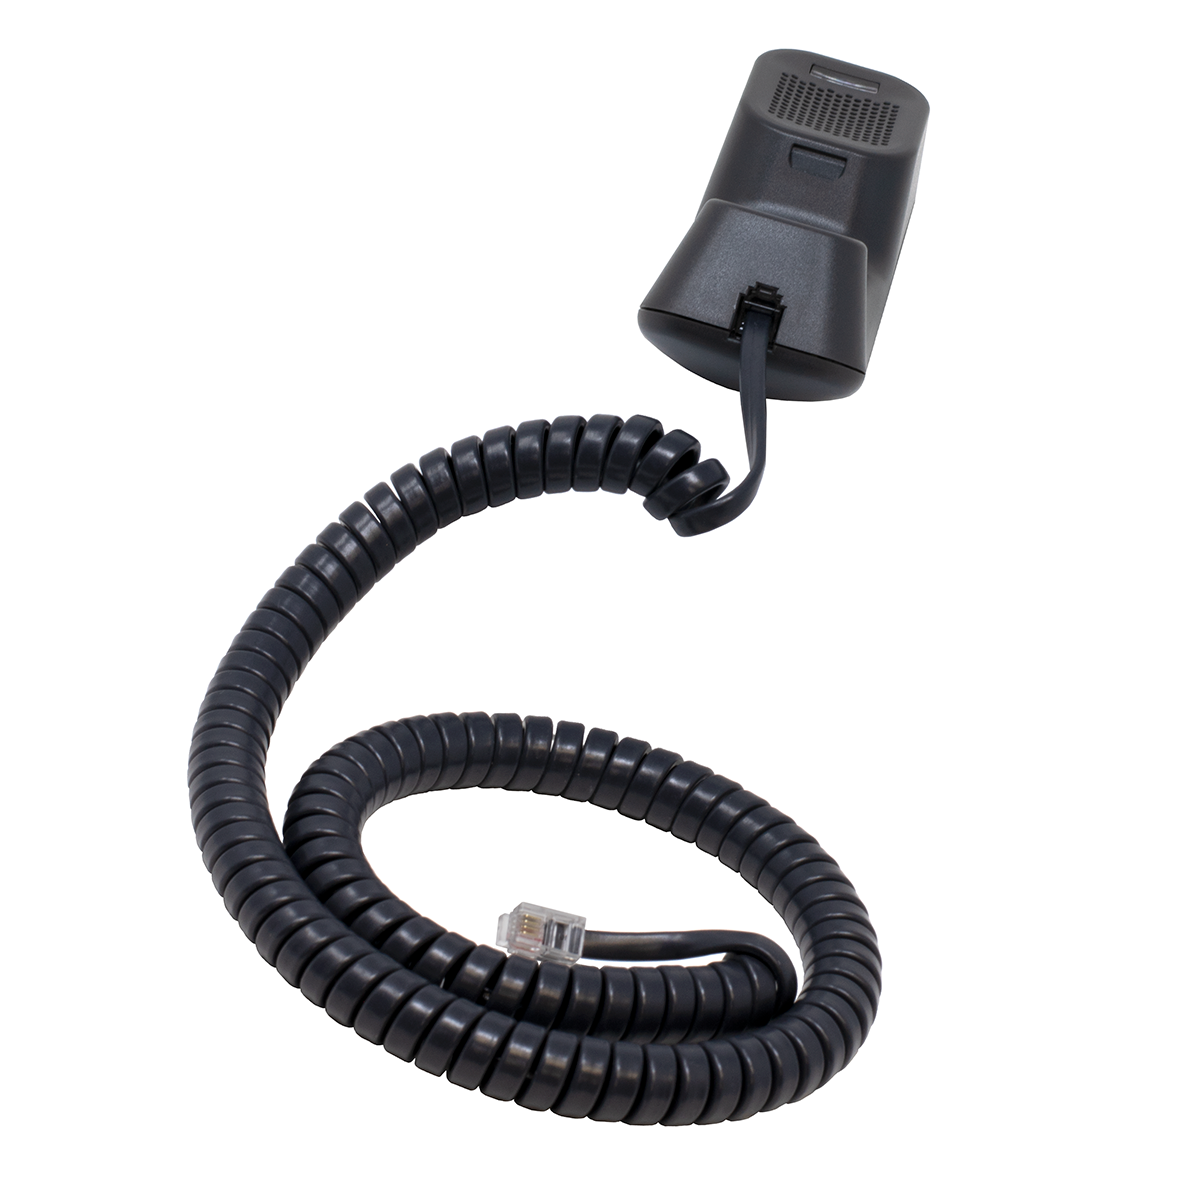 12' Charcoal Gray Coiled Handset Cord (Handset View)